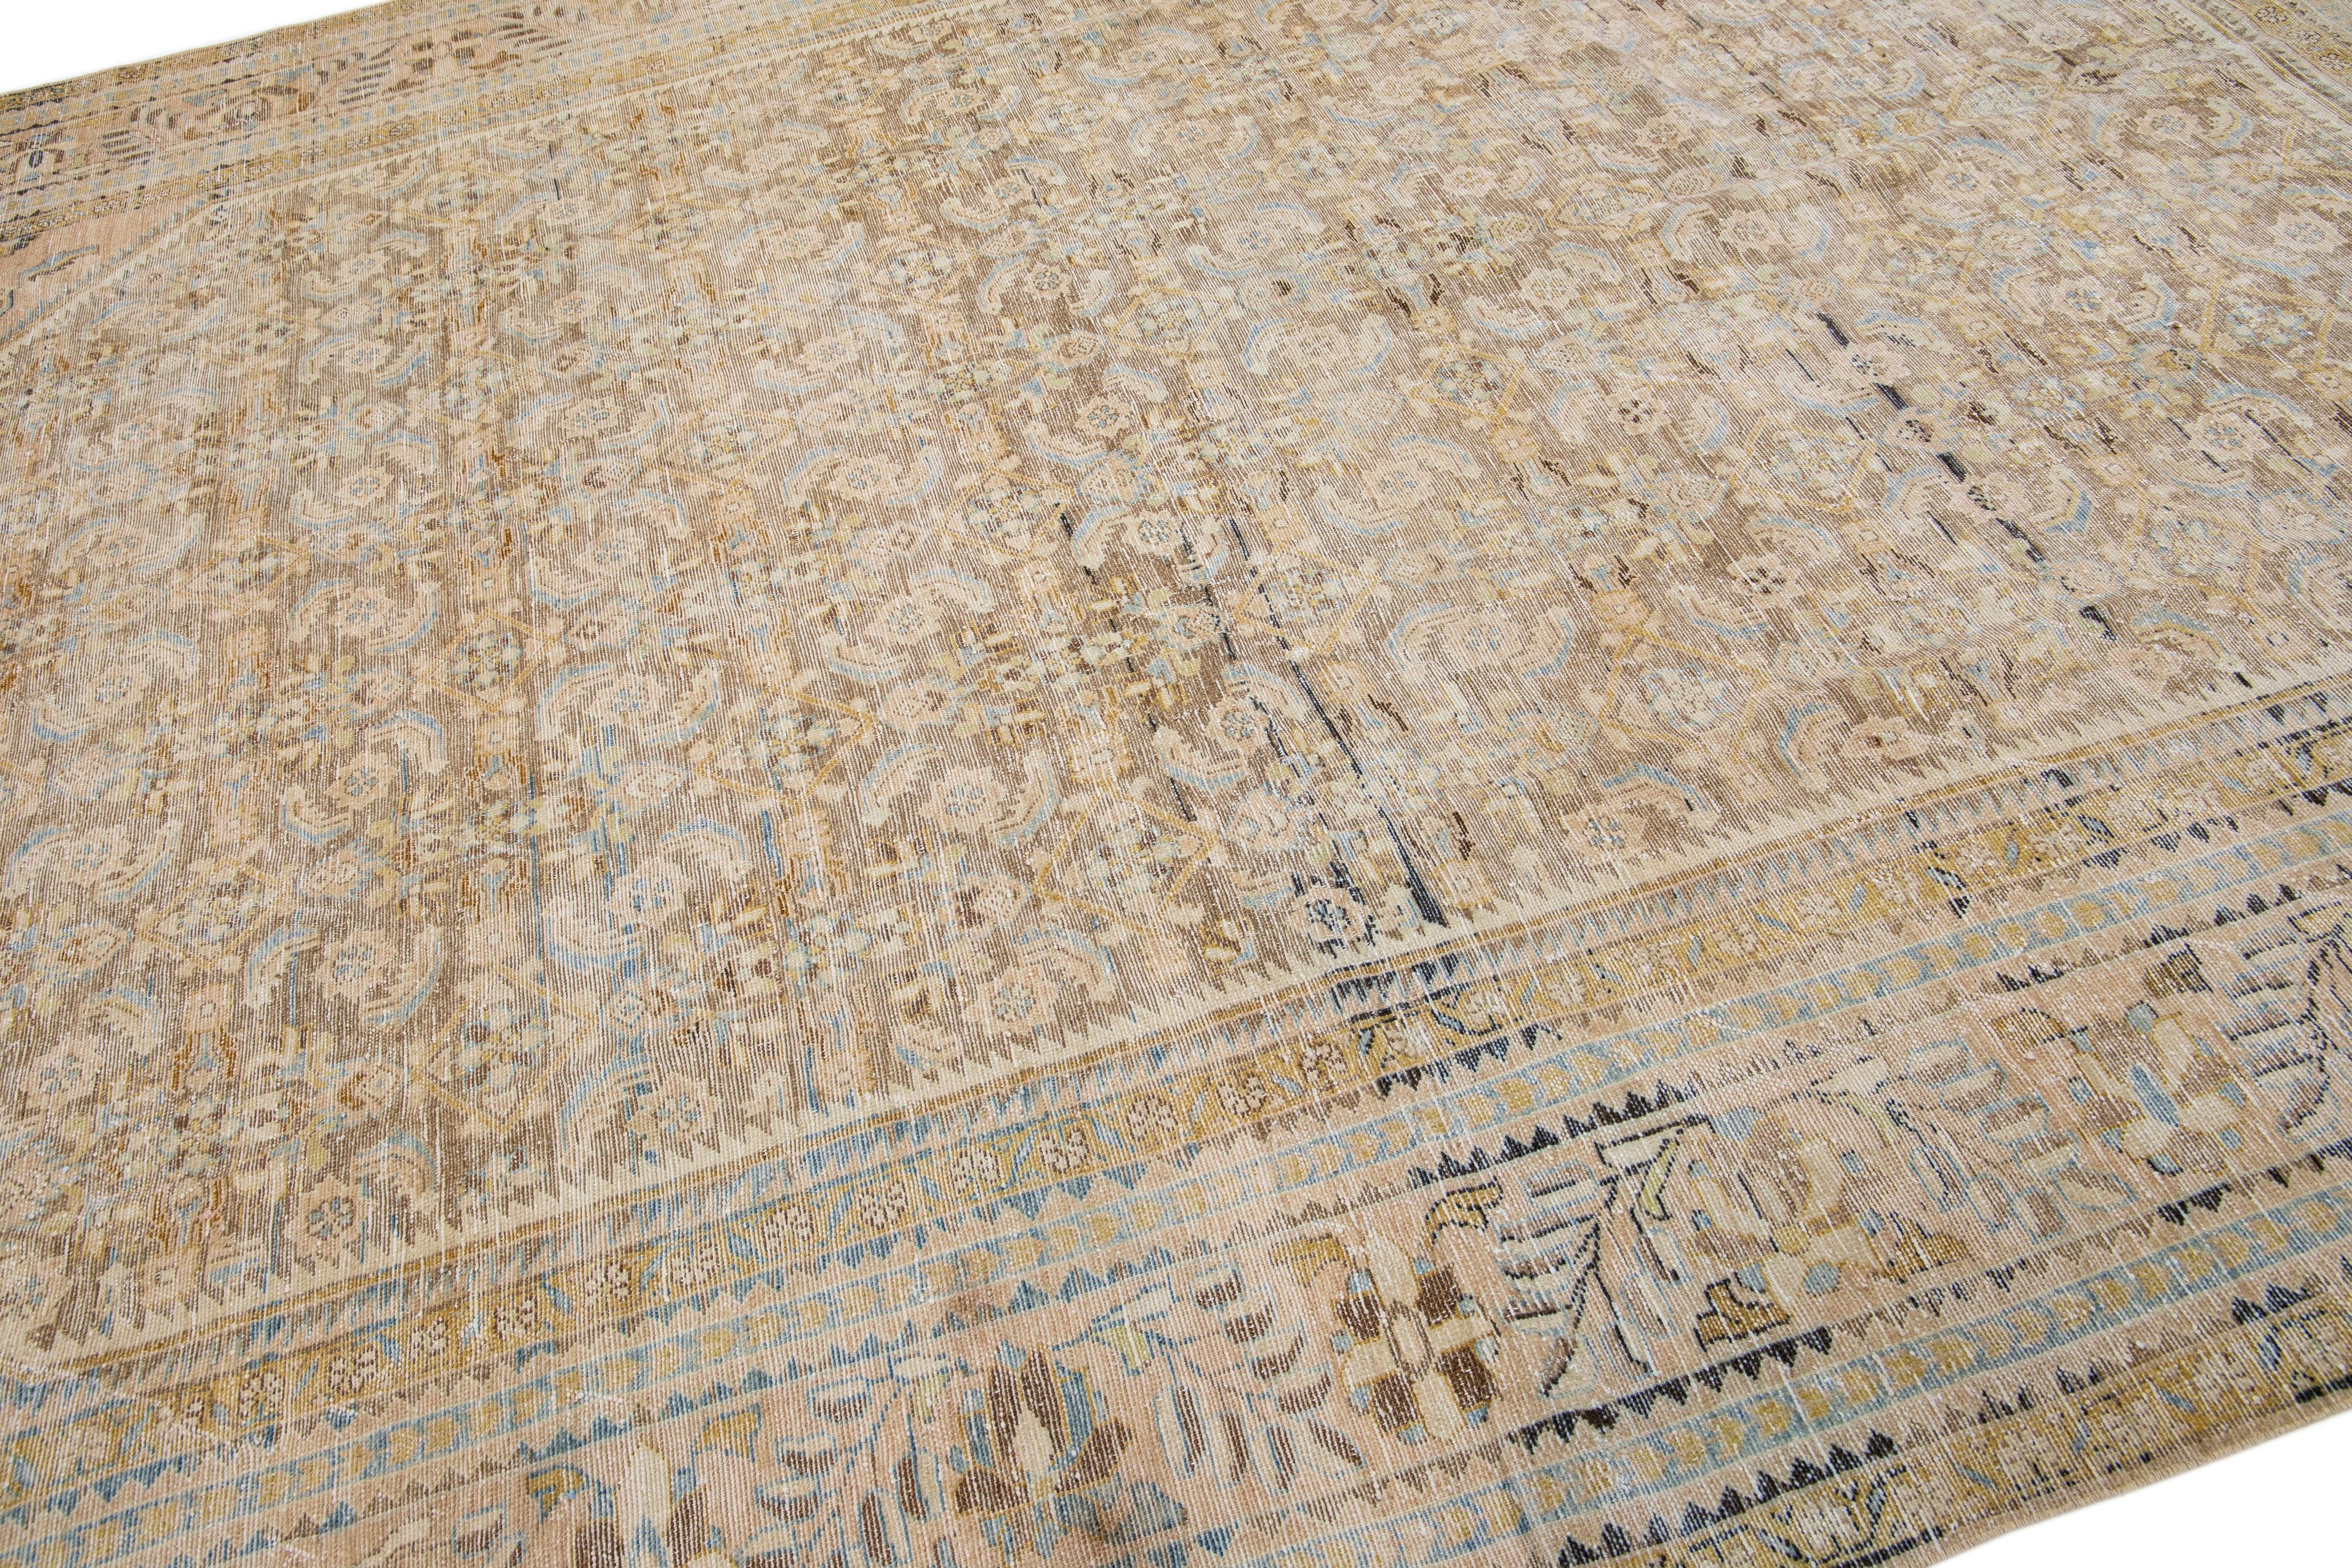 Handmade Tan Antique Persian Malayer Wool Rug with Allover Motif In Good Condition For Sale In Norwalk, CT